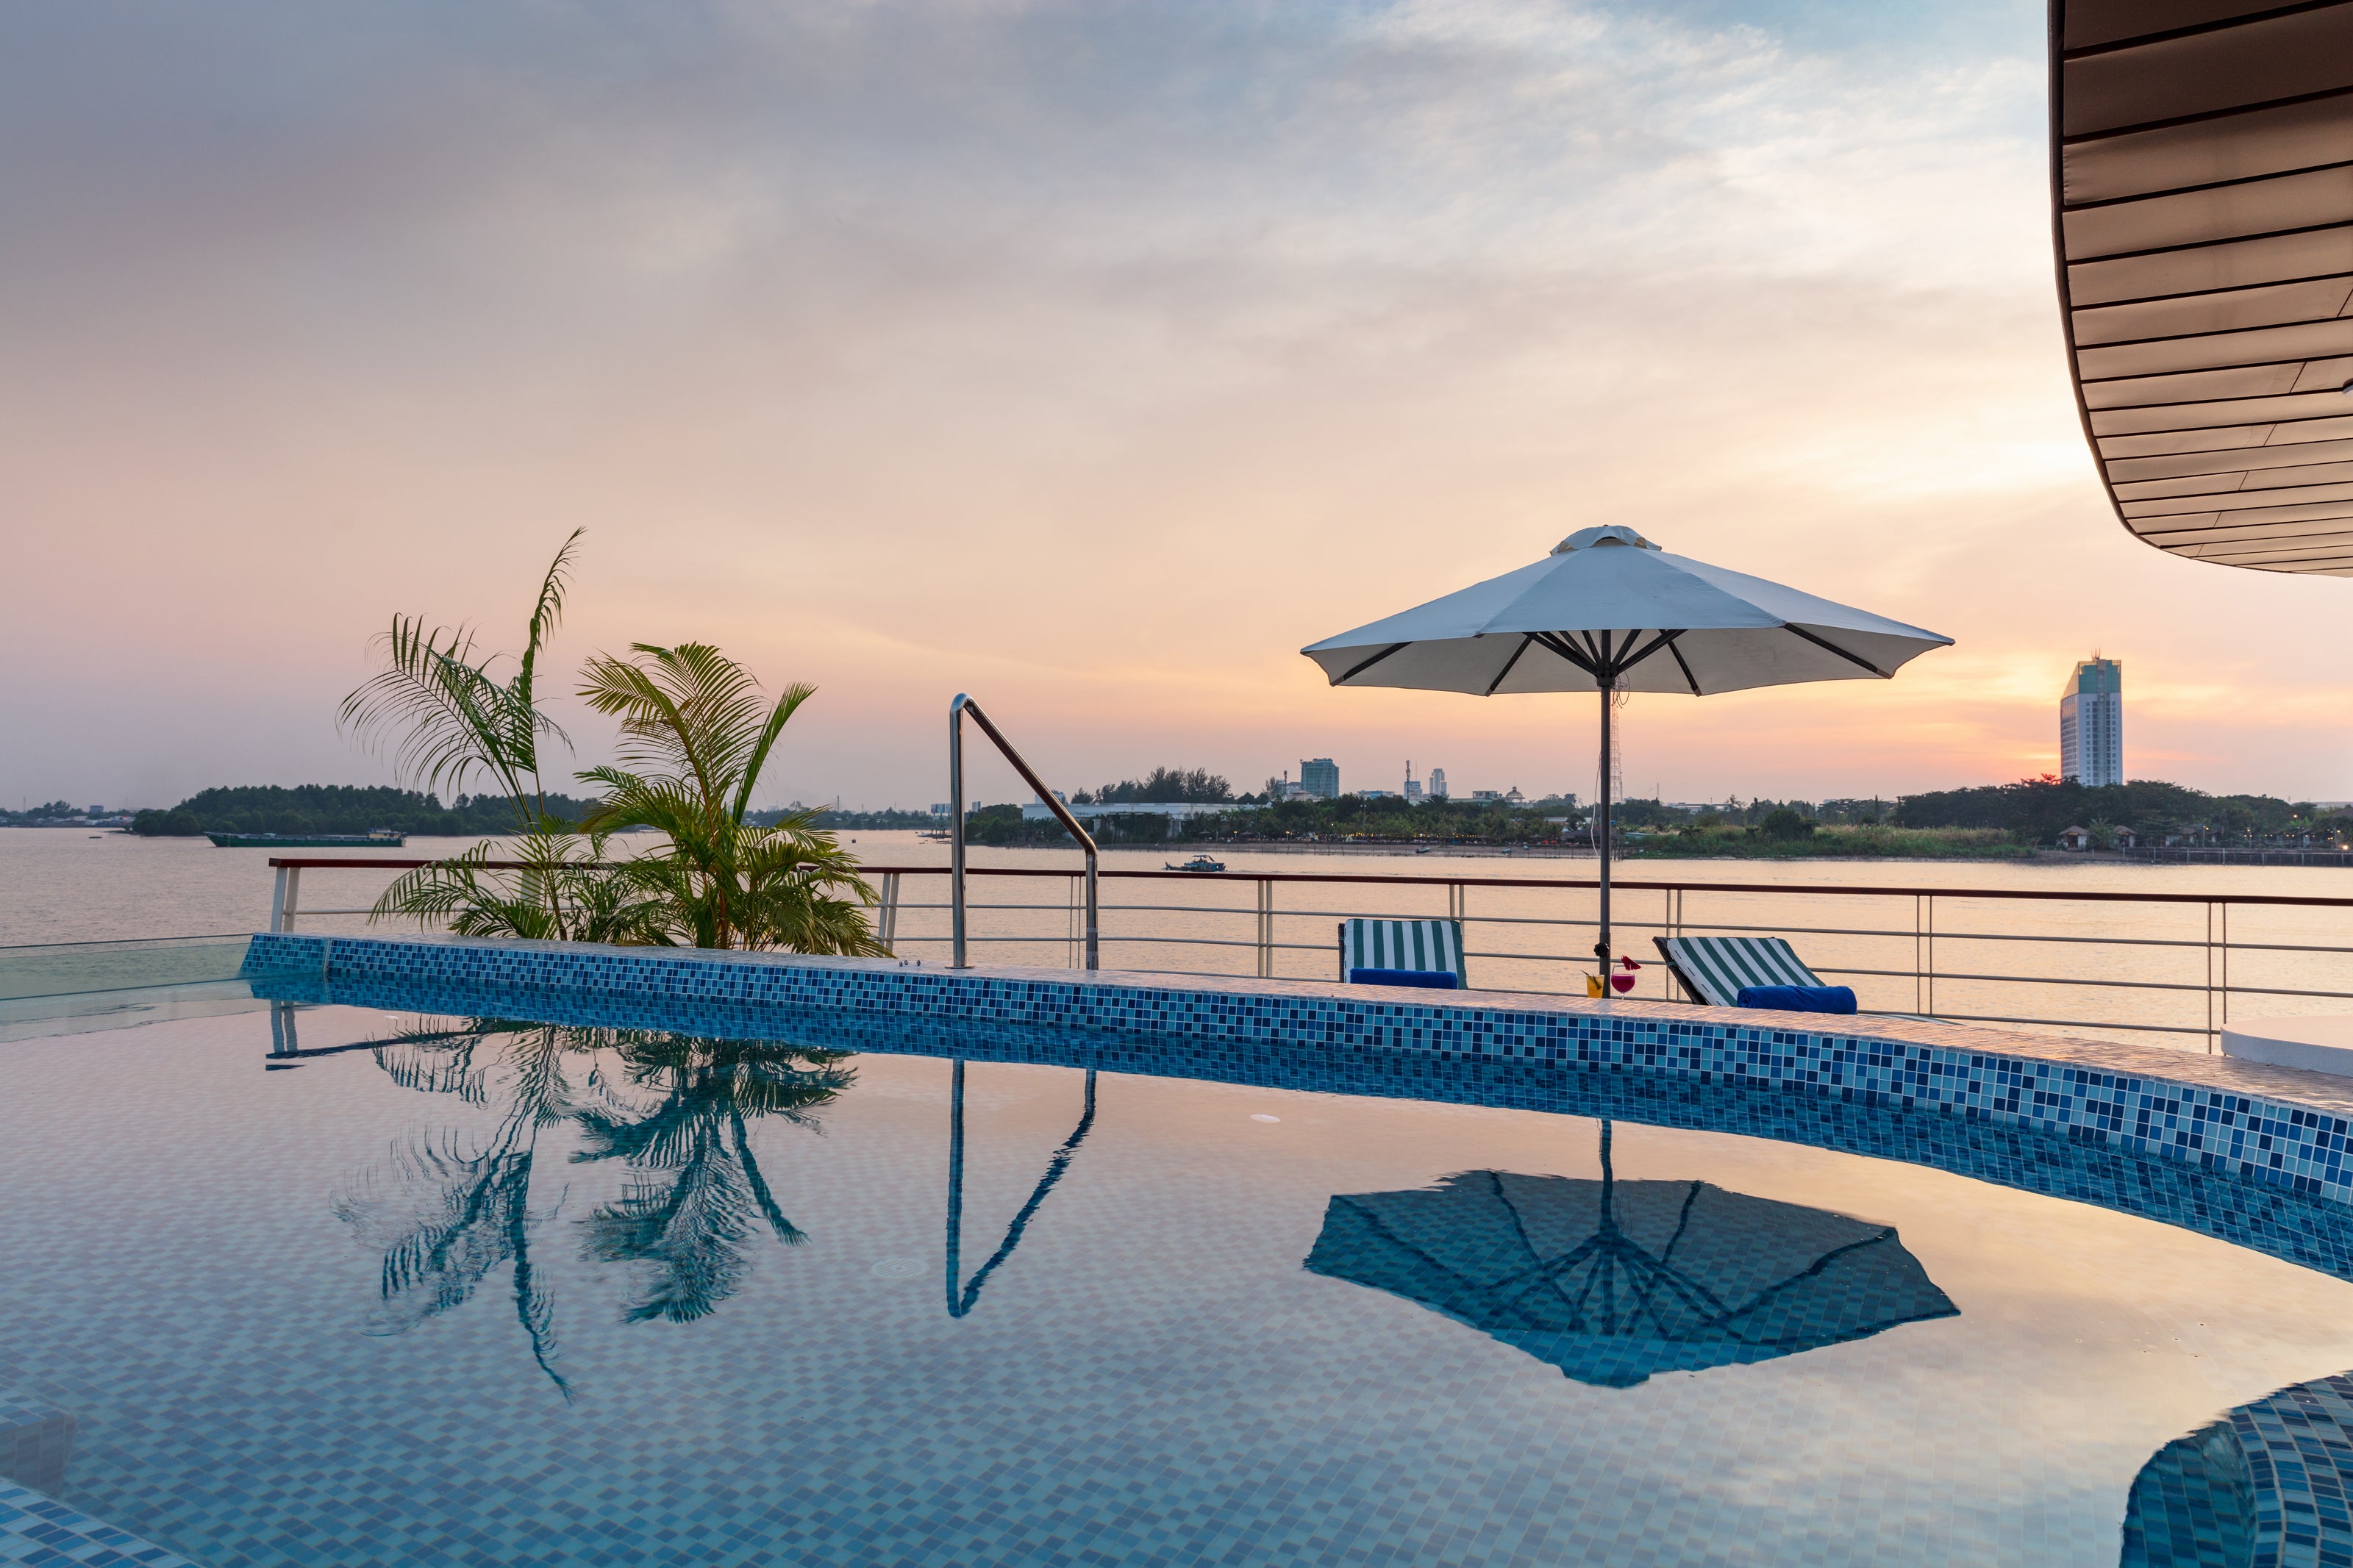 The pool onboard the Victoria Mekong